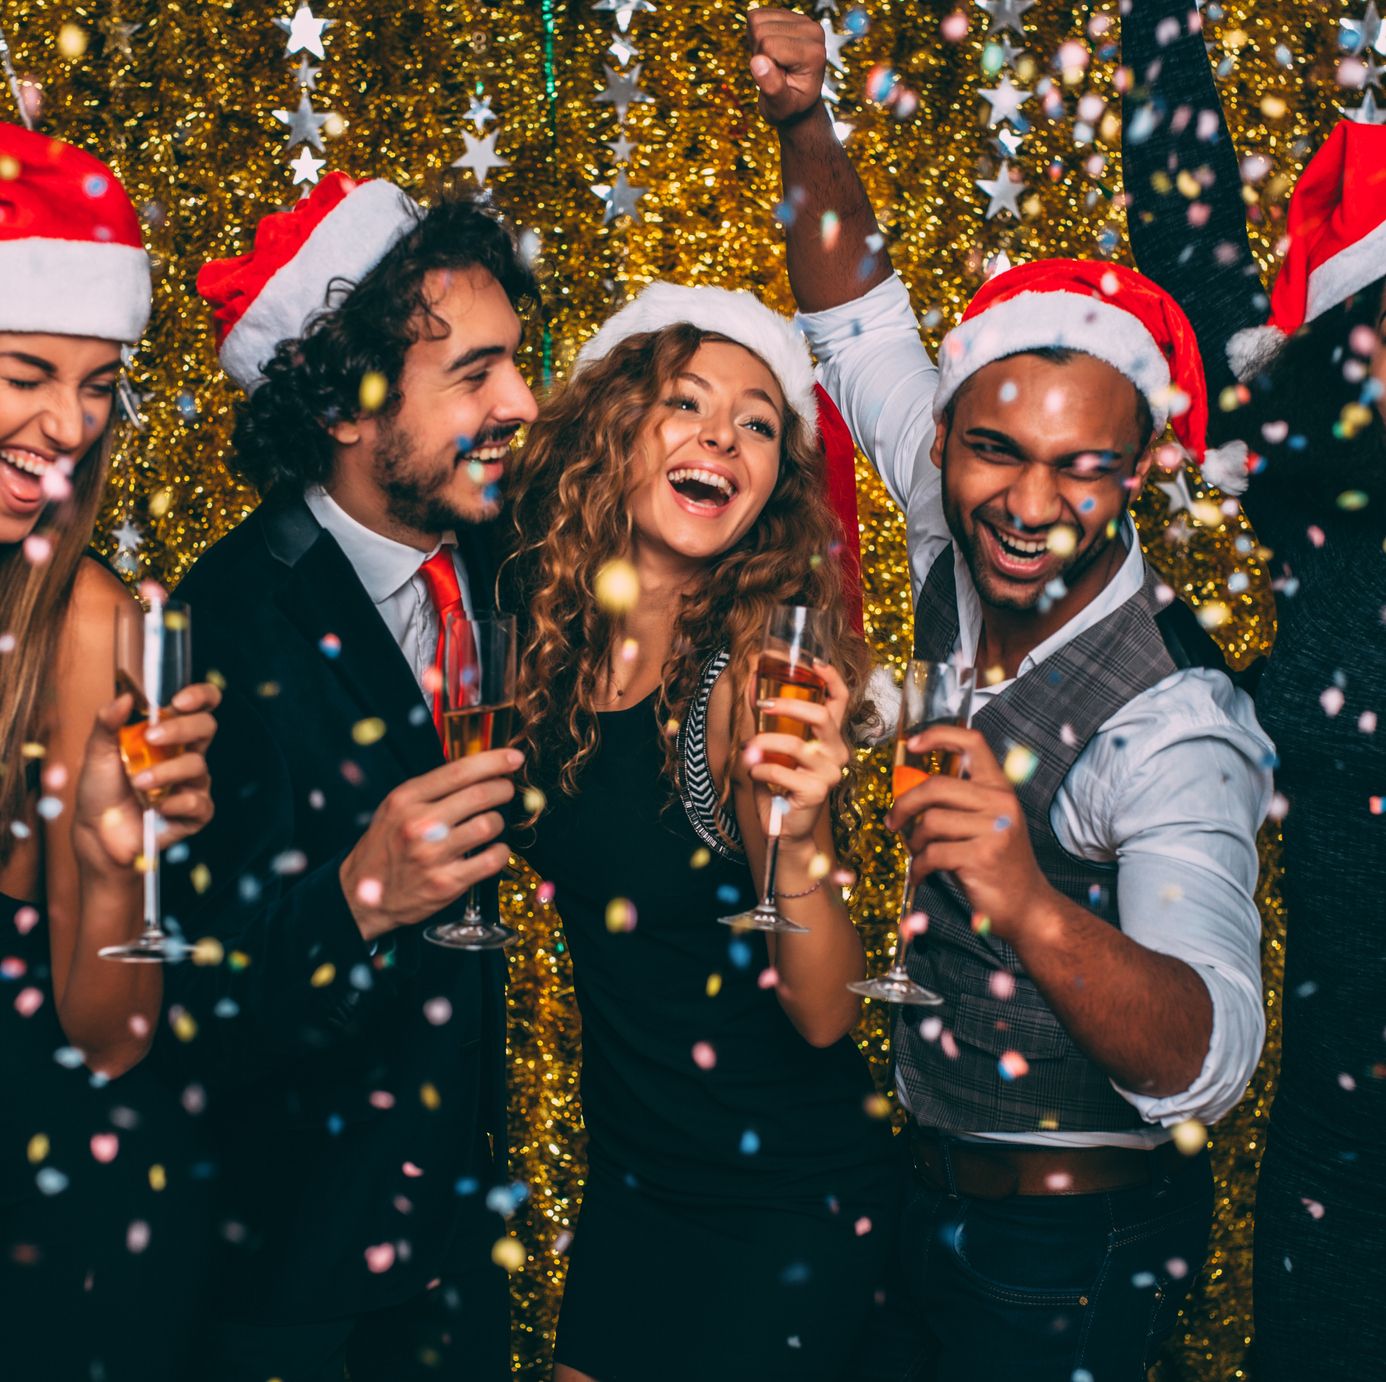 25 Best Christmas Eve Party Ideas for Family - Home, Family, Style and Art Ideas